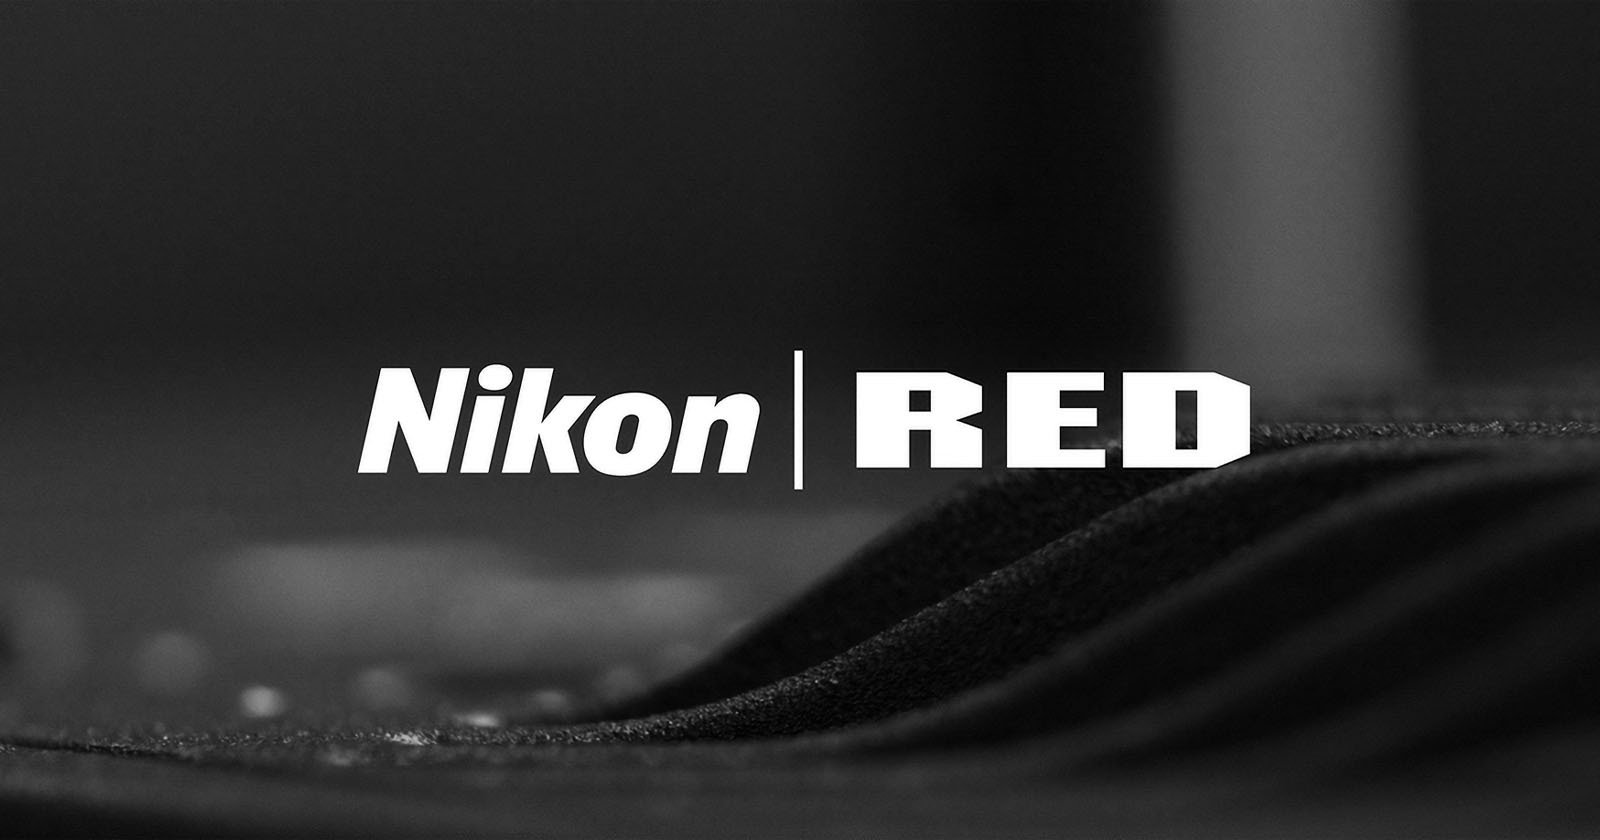 Nikon Is Officially REDs New Owner